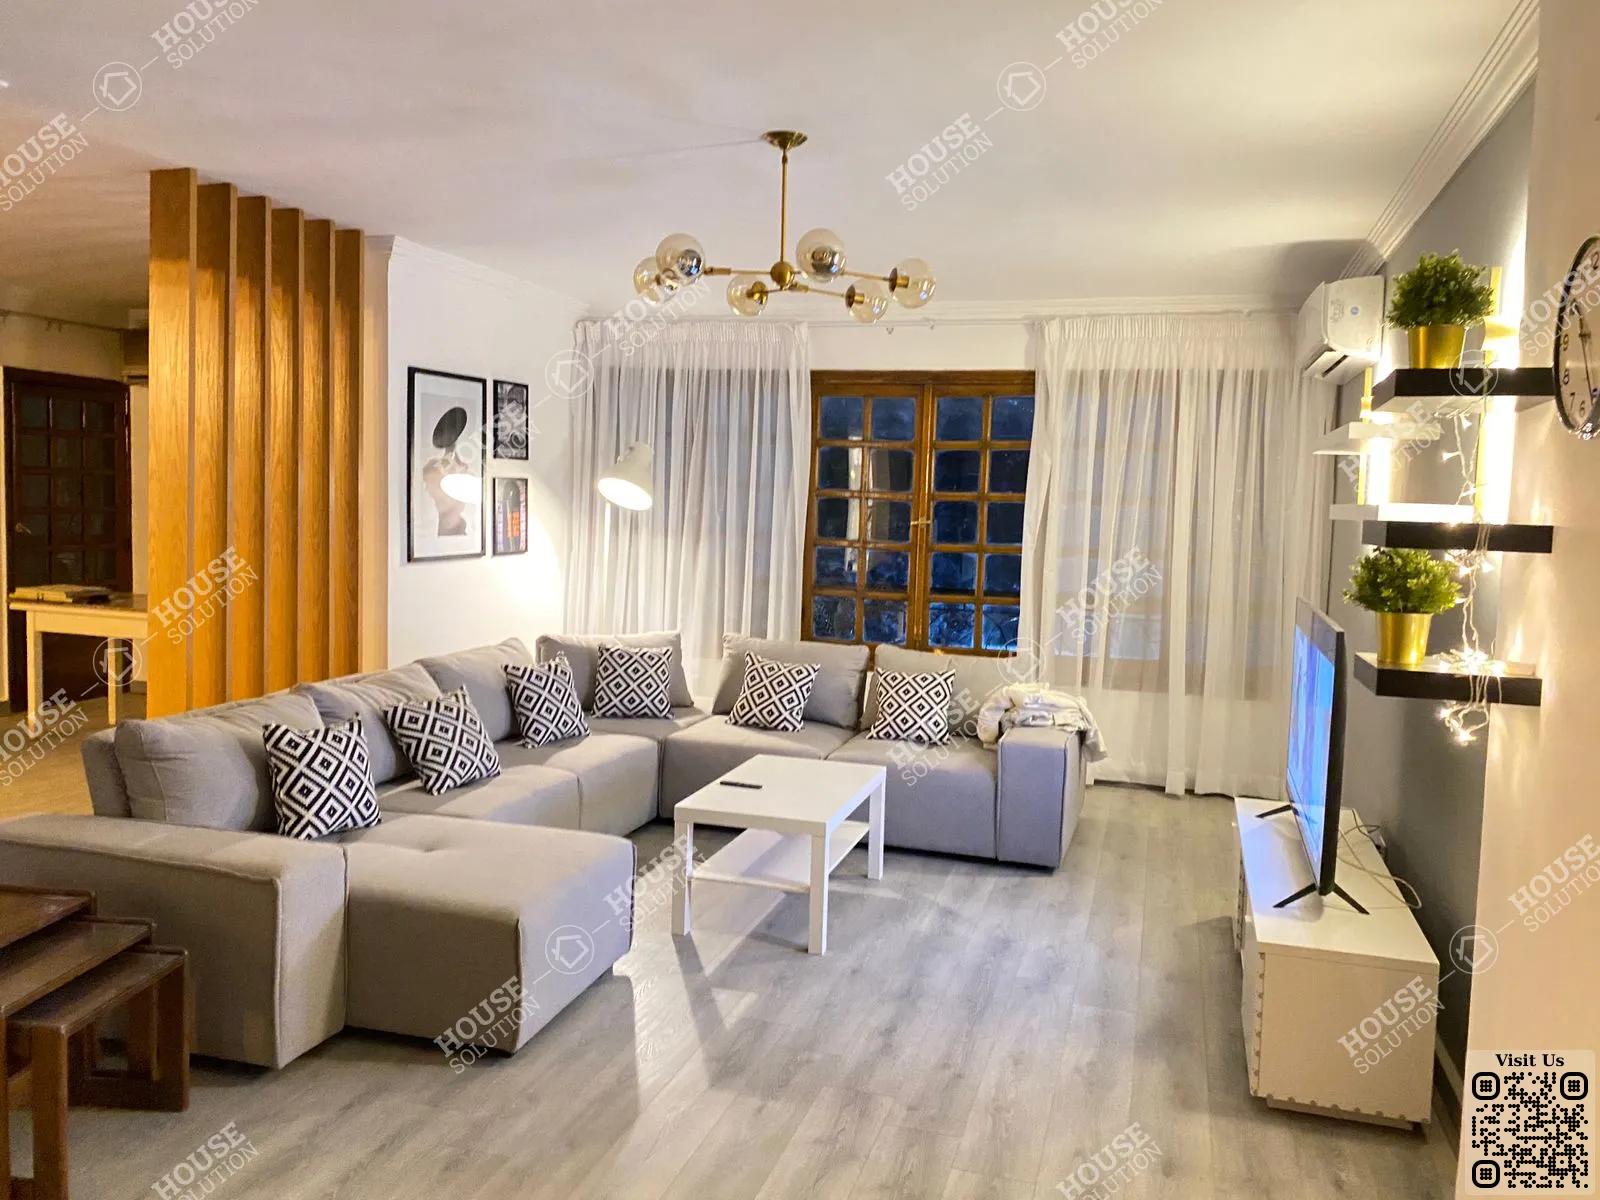 RECEPTION  @ Apartments For Rent In Maadi Maadi Degla Area: 282 m² consists of 3 Bedrooms 3 Bathrooms Modern furnished 5 stars #5408-0